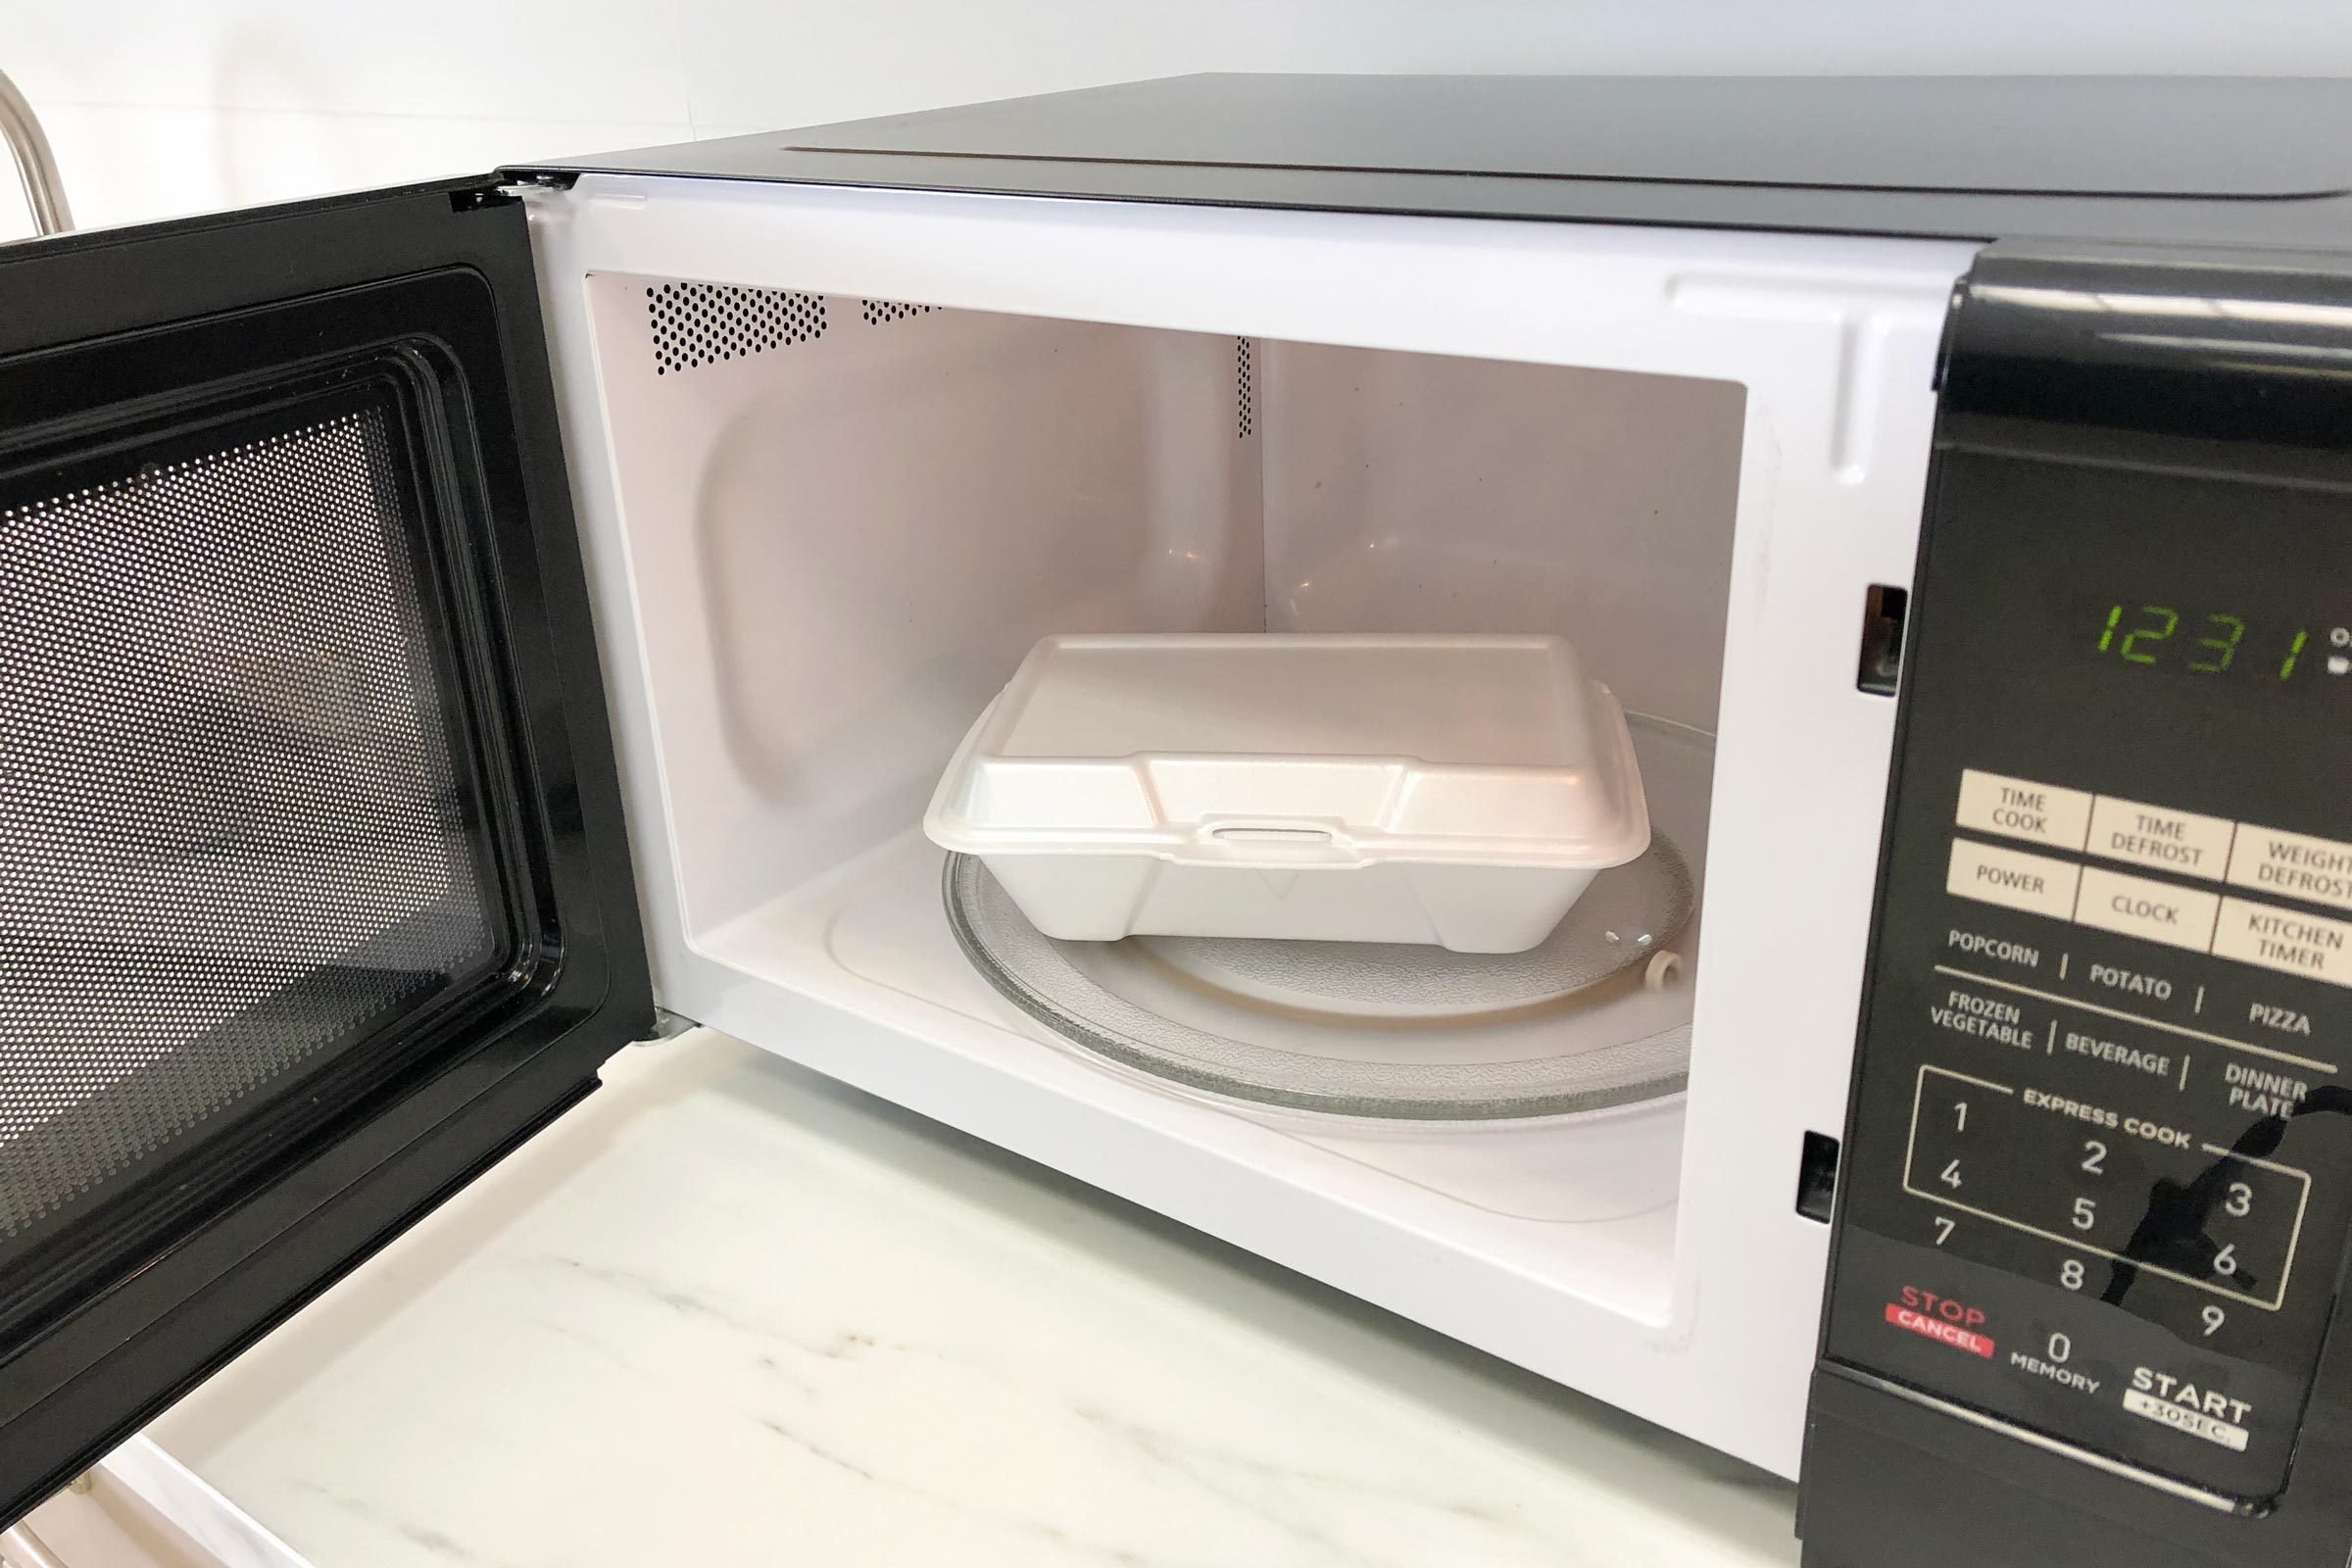 Can You Microwave Styrofoam? Is It Safe?